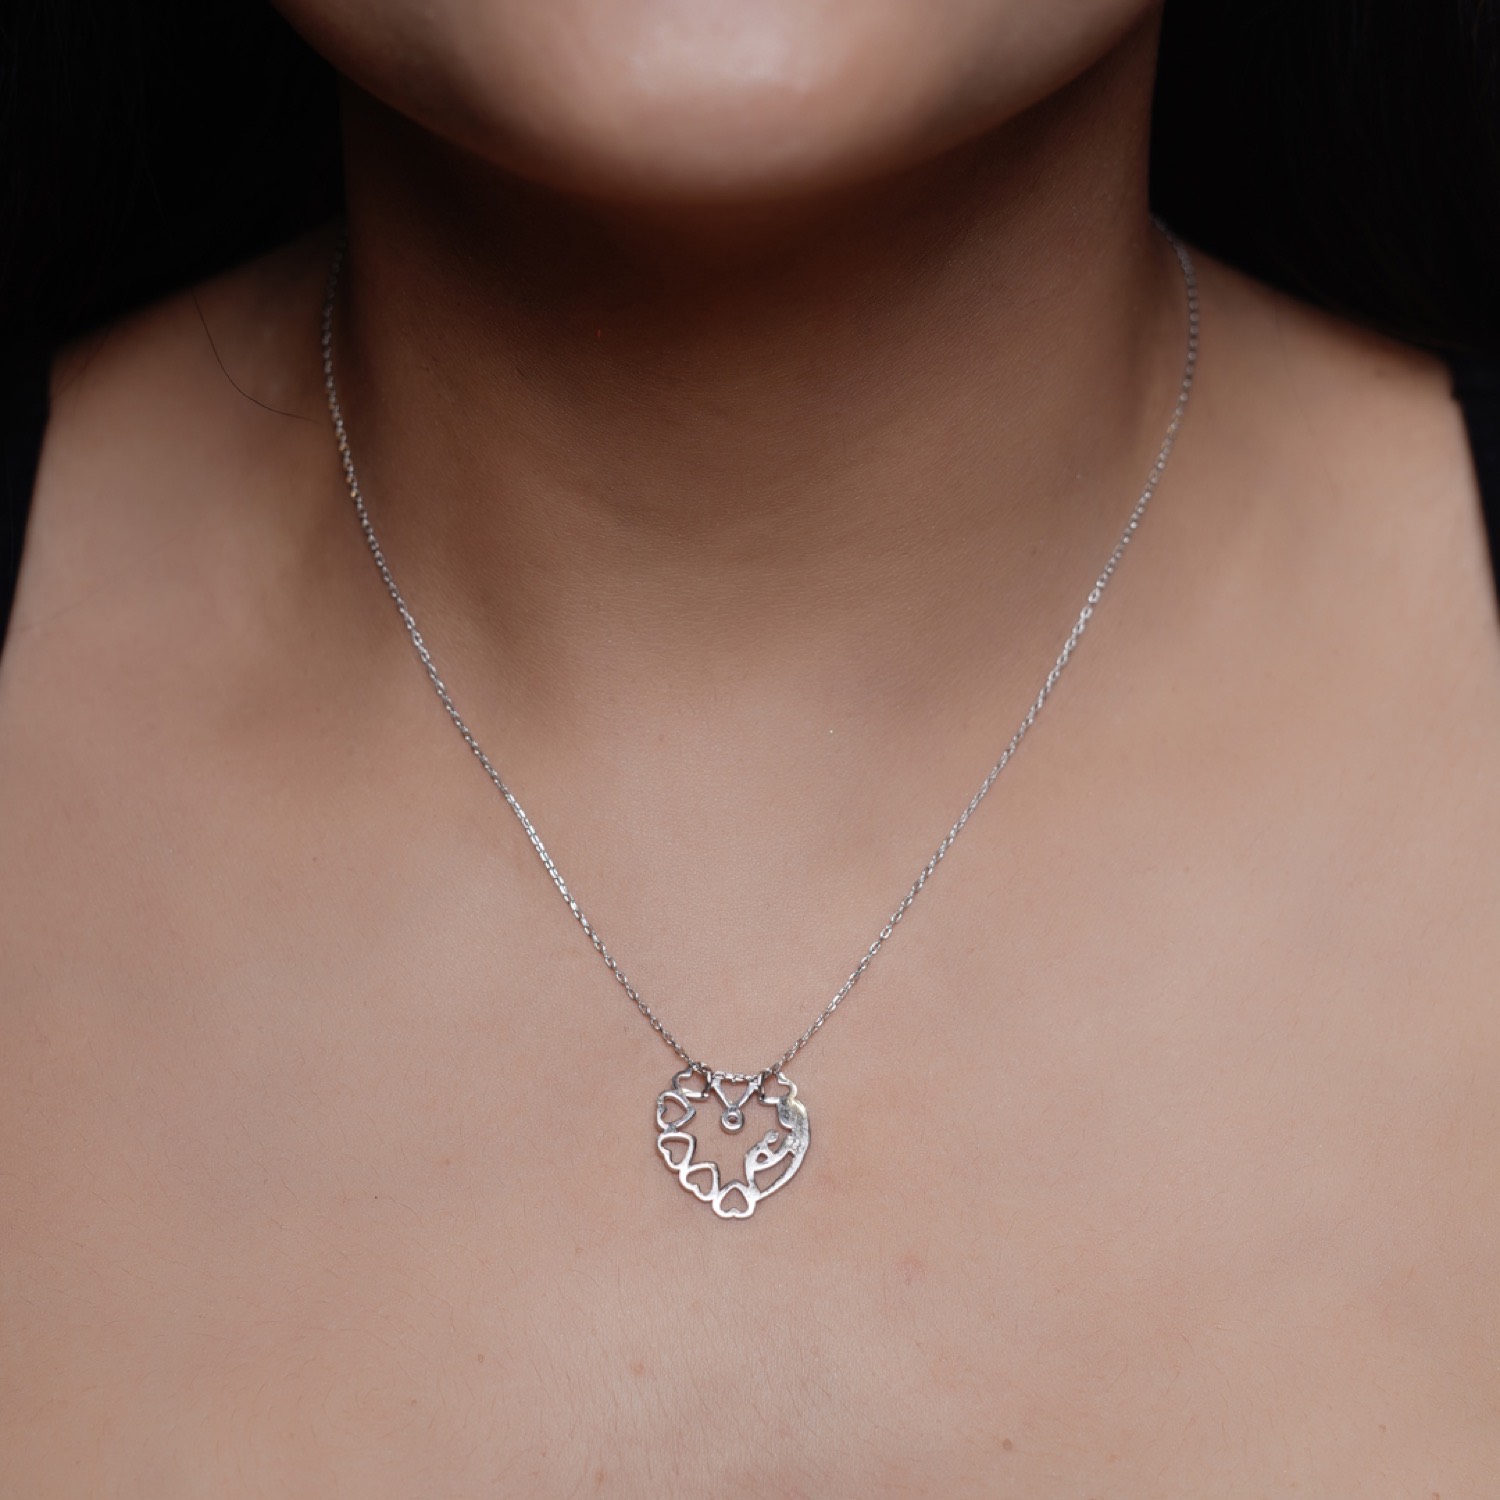 varam_chain_102022_hollow_heart_shaped_couple_pendant_with_silver_chain-2